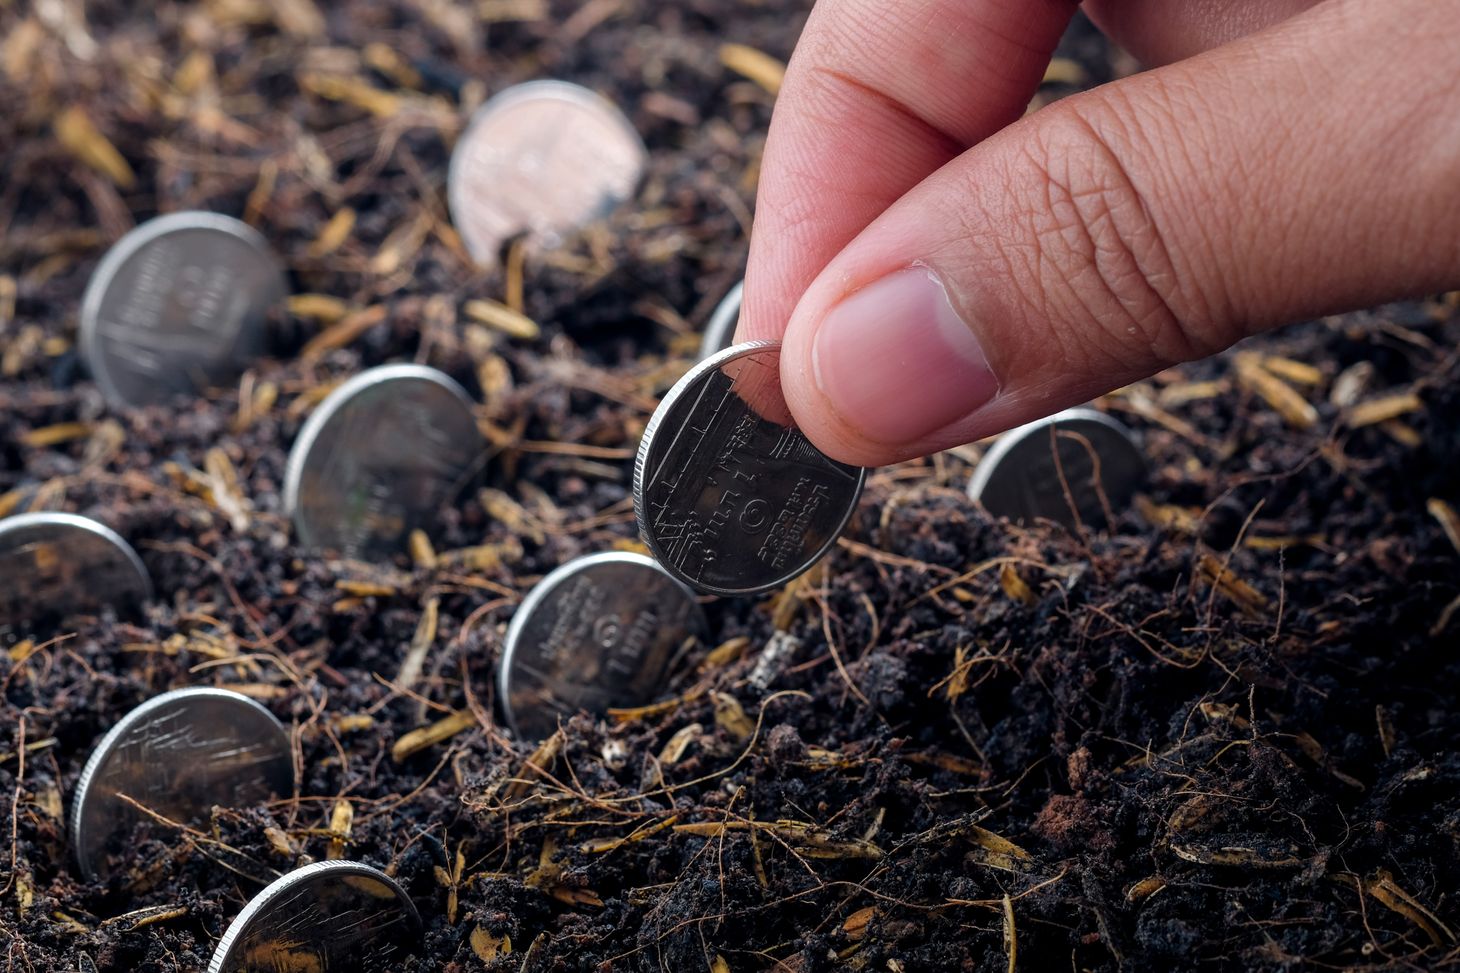 Image of coins being planted like seeds